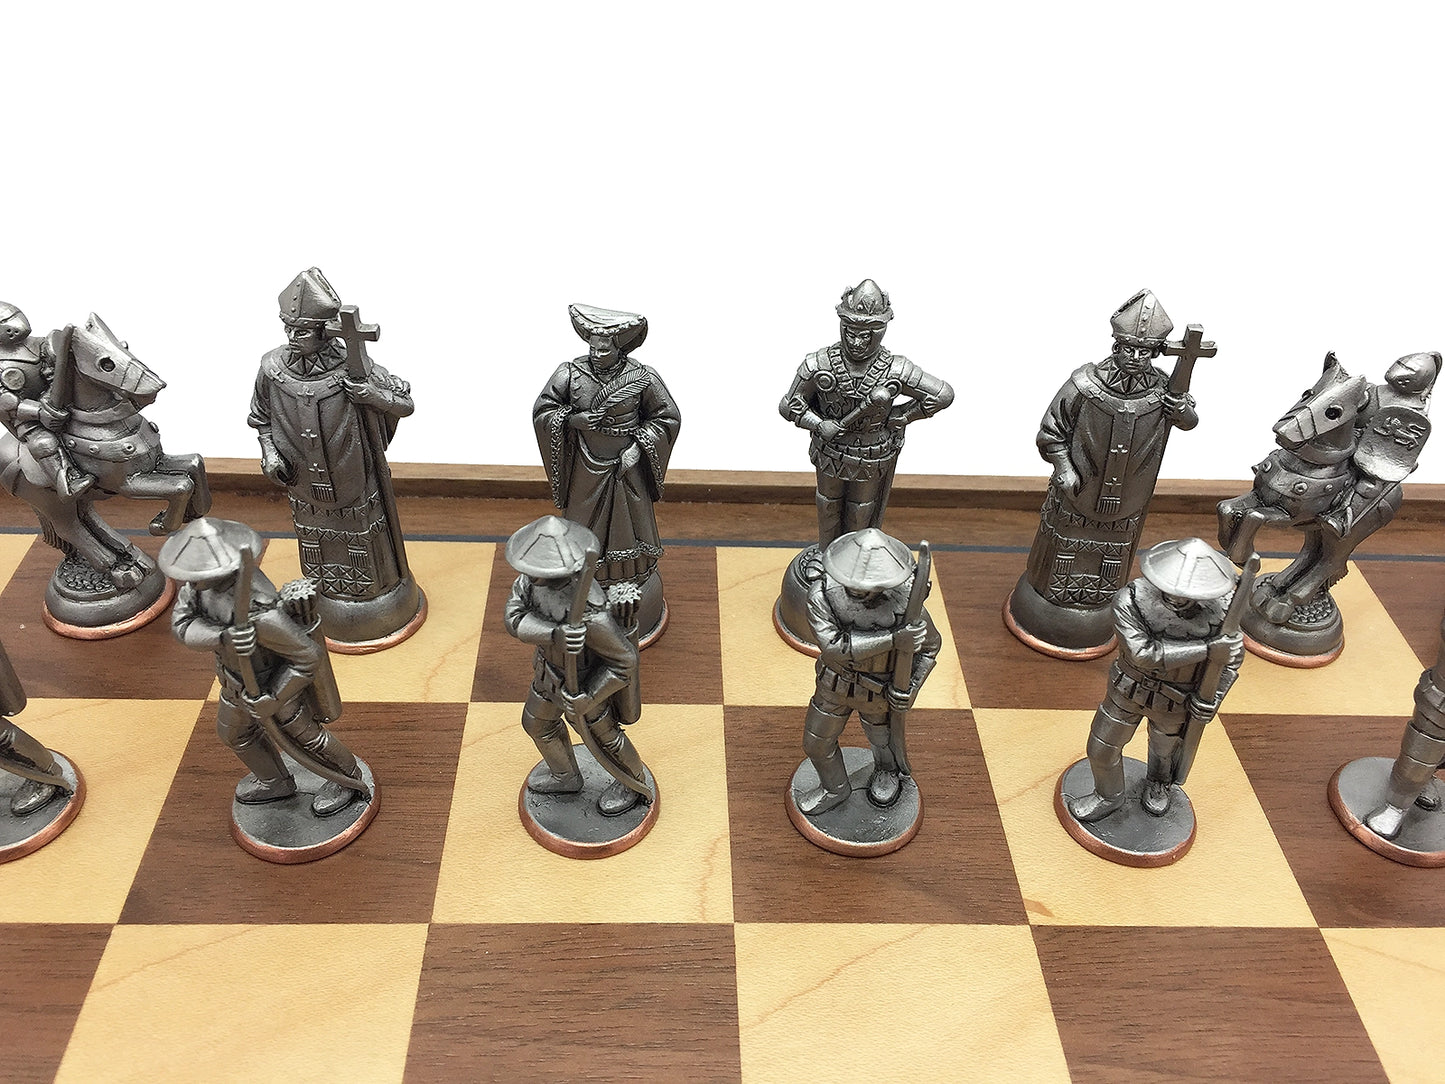 Toy soldier miniature army men Medieval Battle of Agincourt Chess Set. Up close.